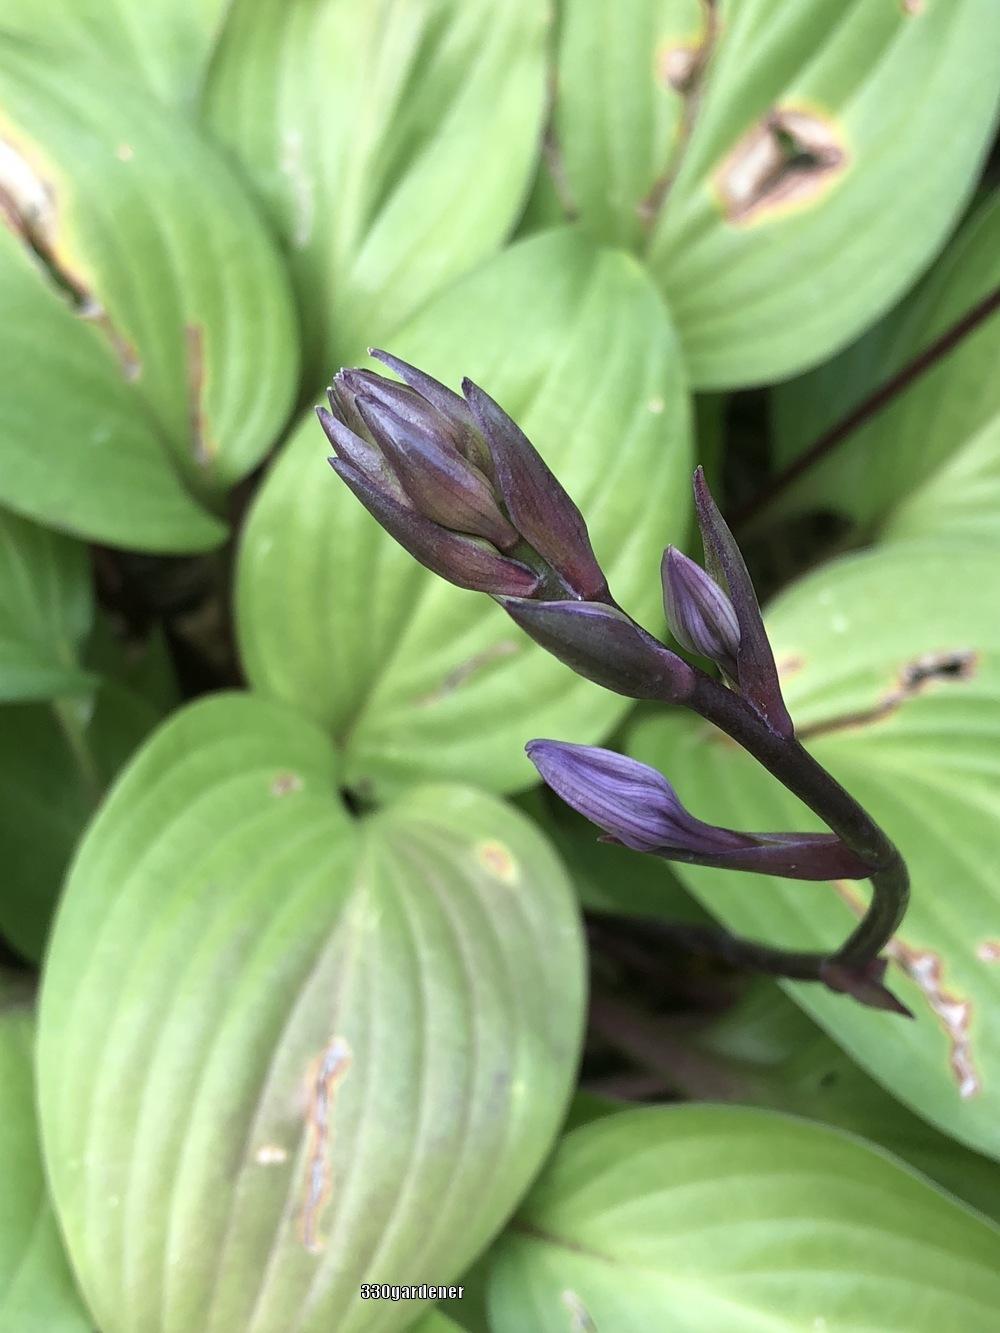 Photo of Hosta 'First Blush' uploaded by crawgarden